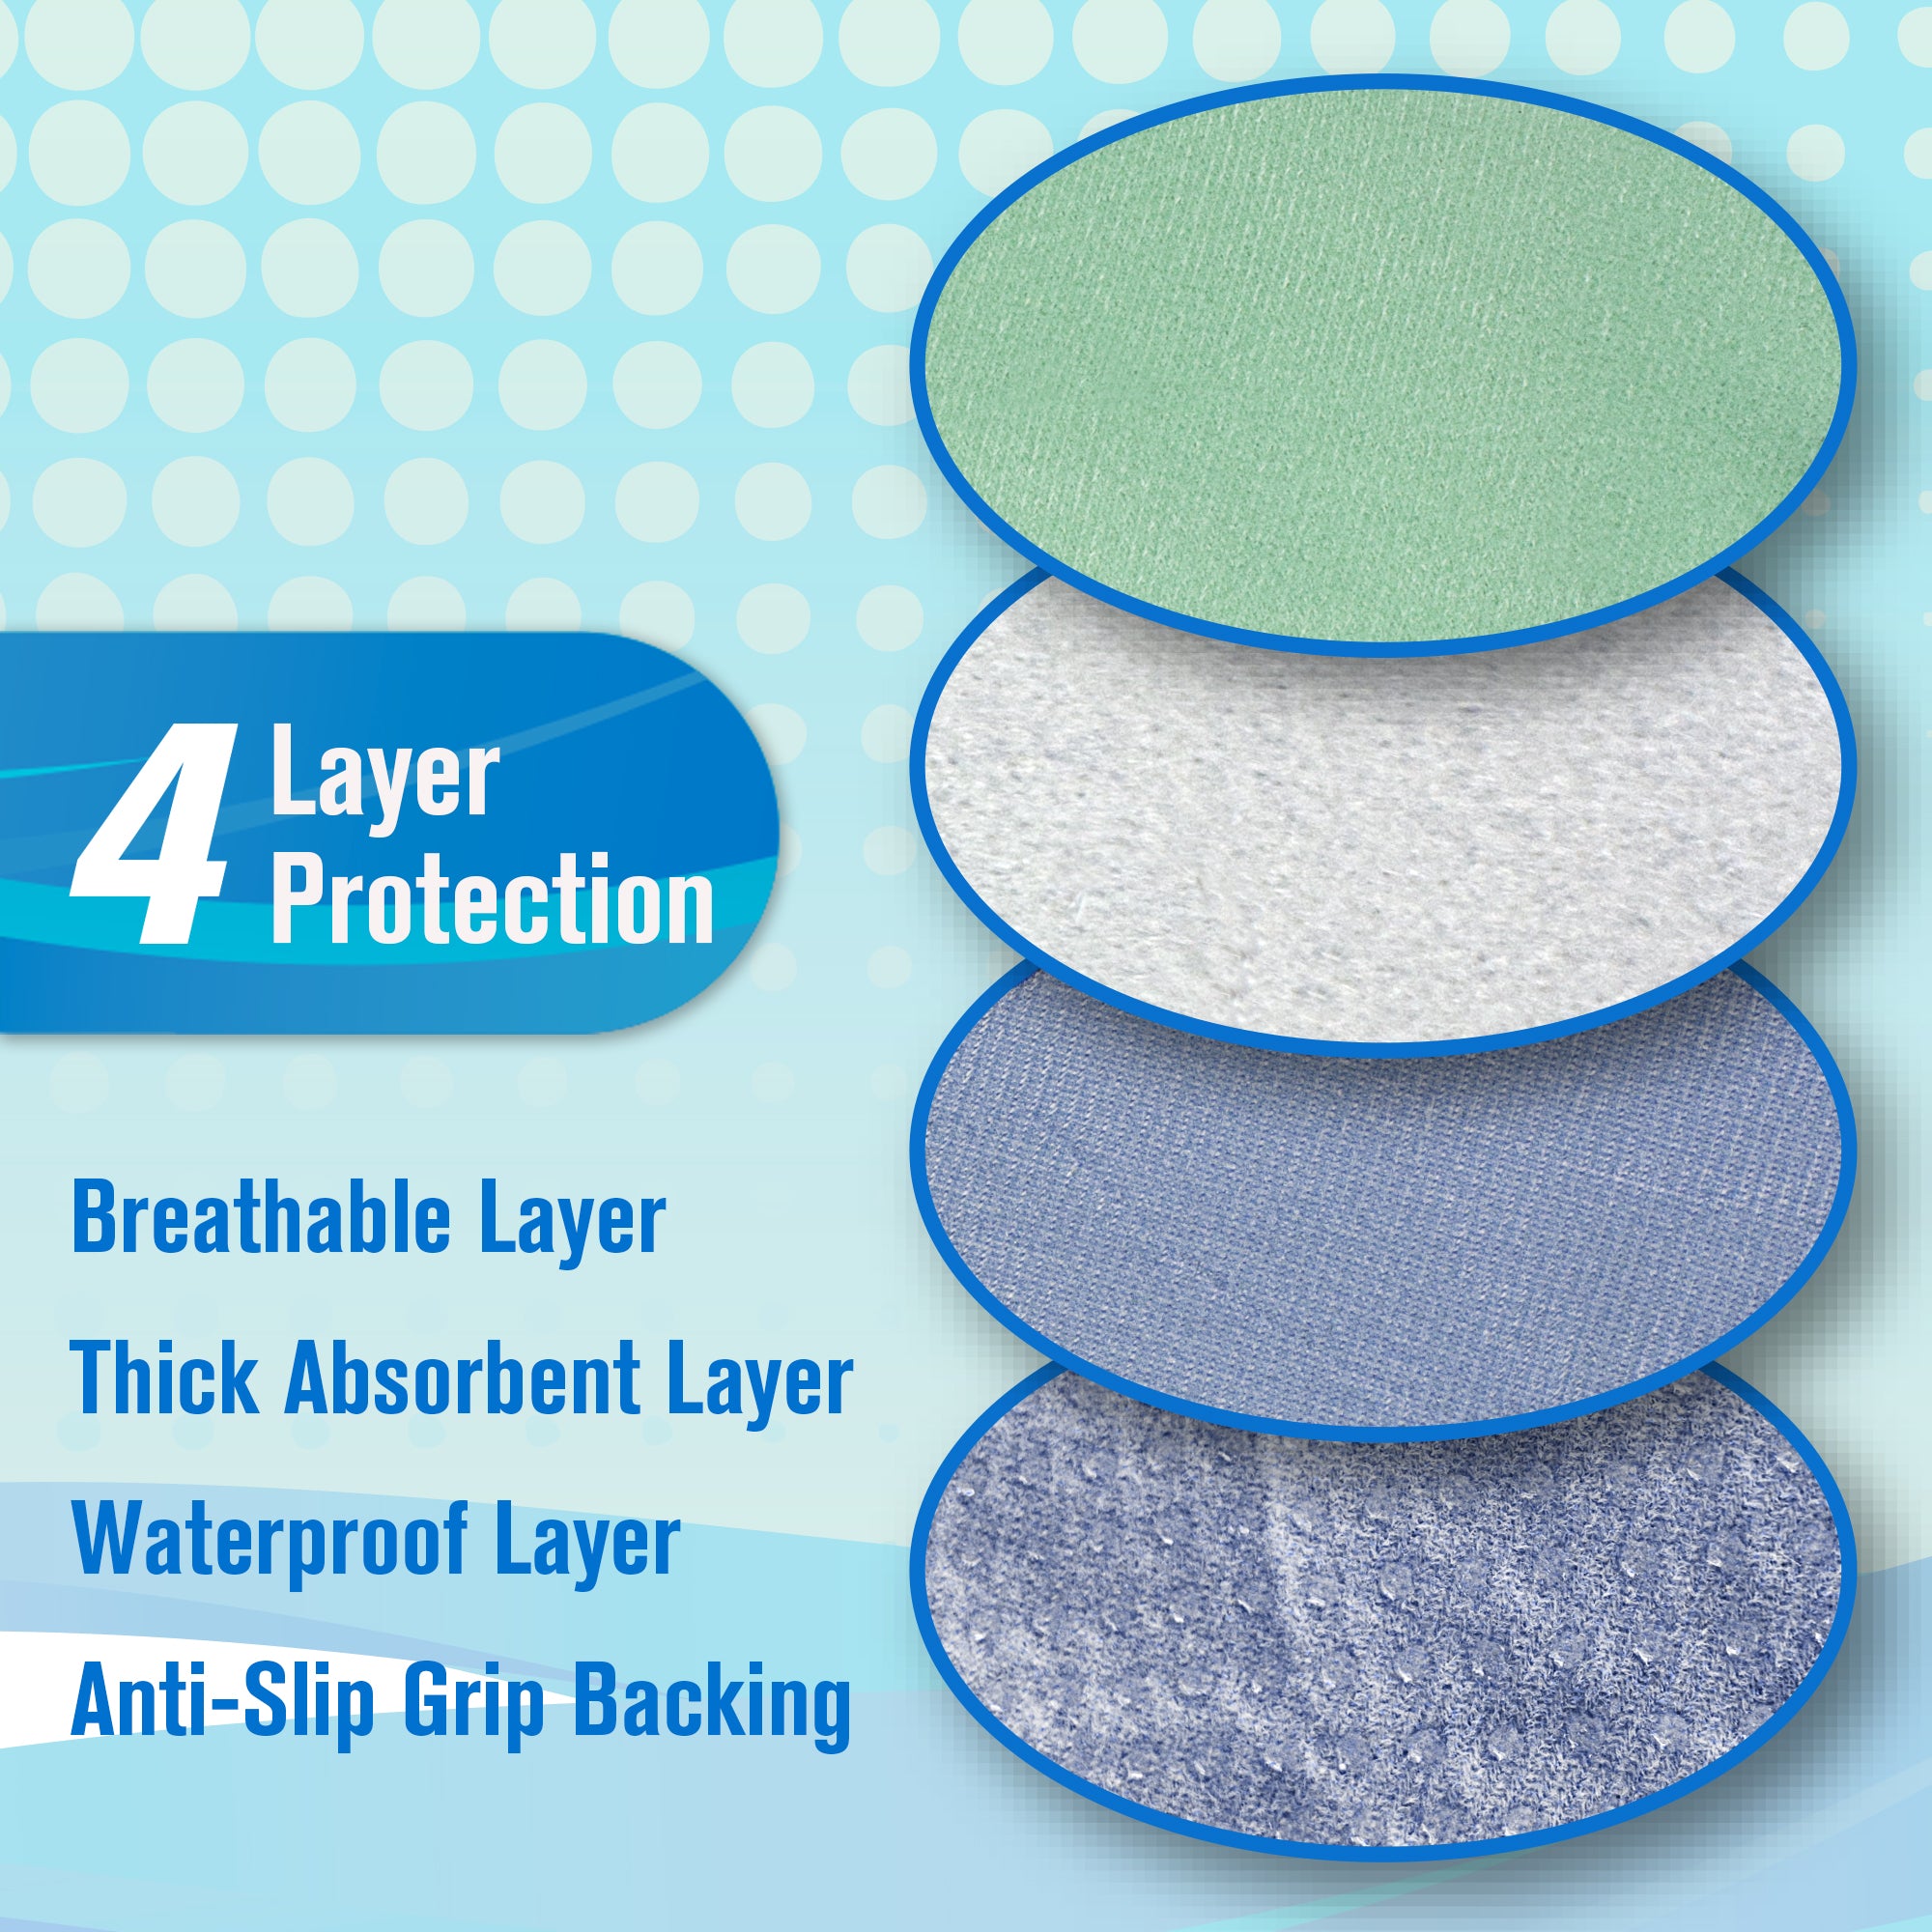 Night Defense™ Underpads, Incontinence Bed Protectors